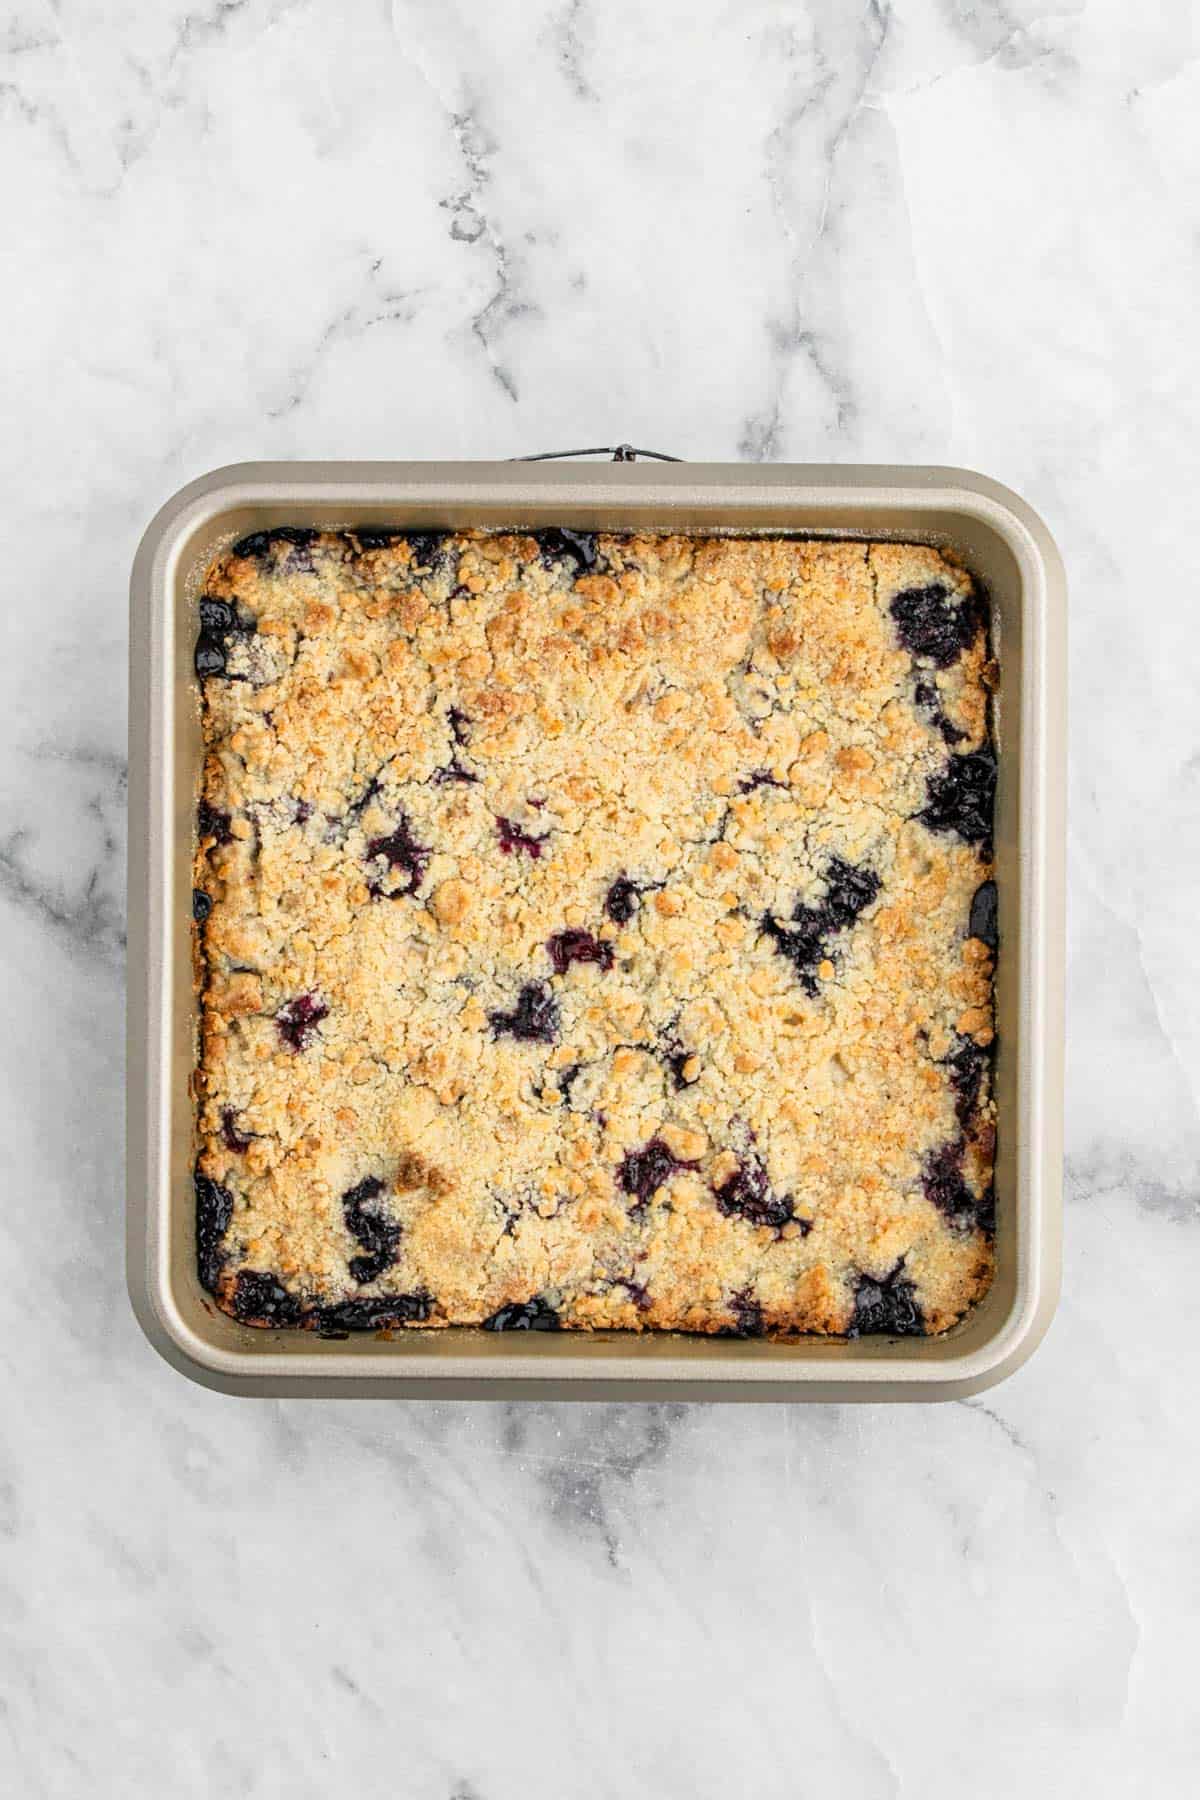 Blueberry bars in a pan after baking.